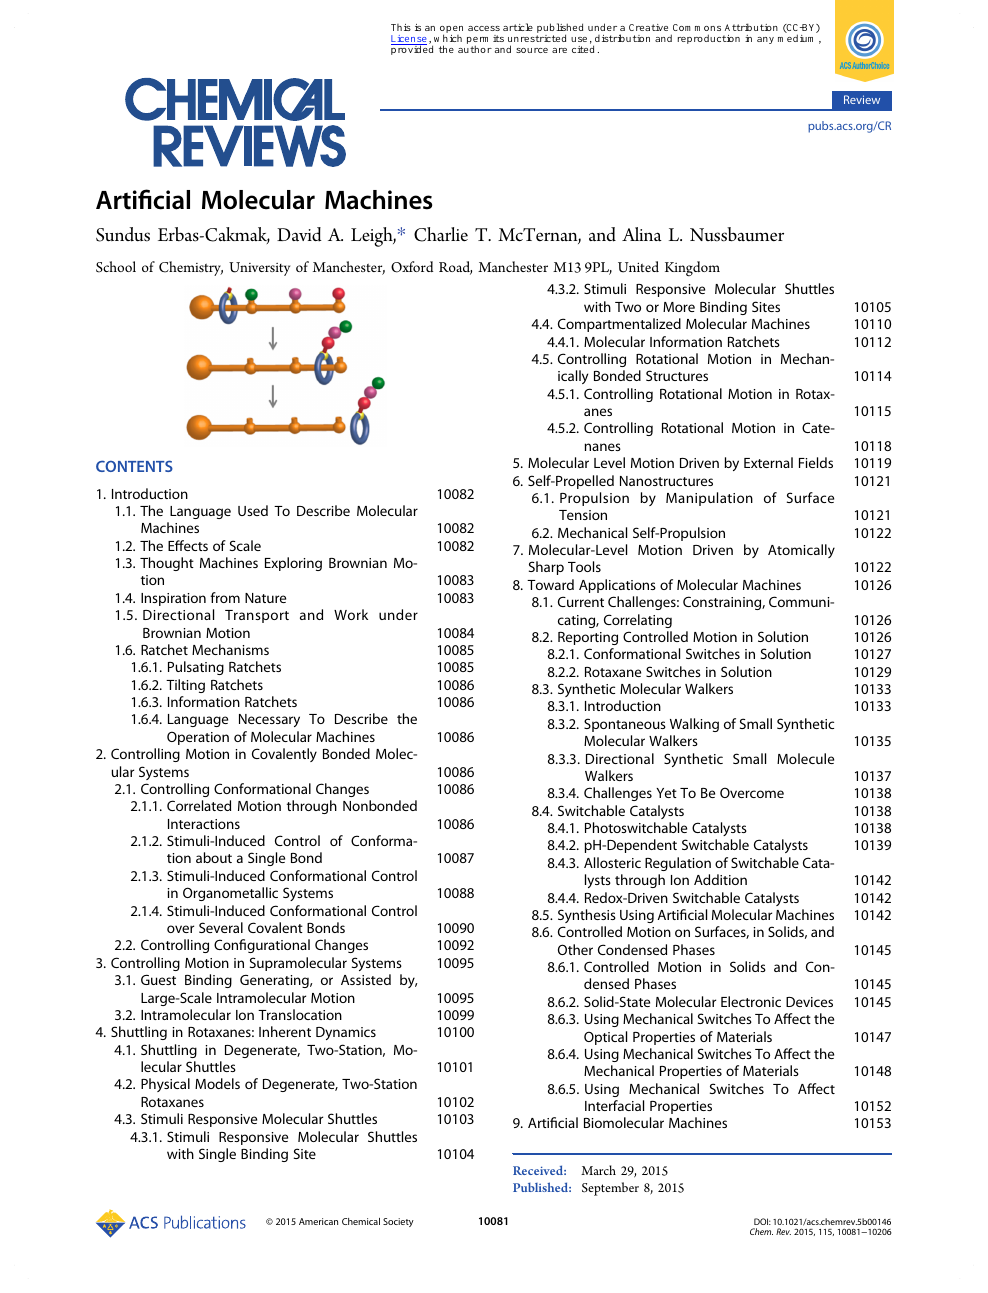 Artificial Molecular Machines – topic of research paper in 